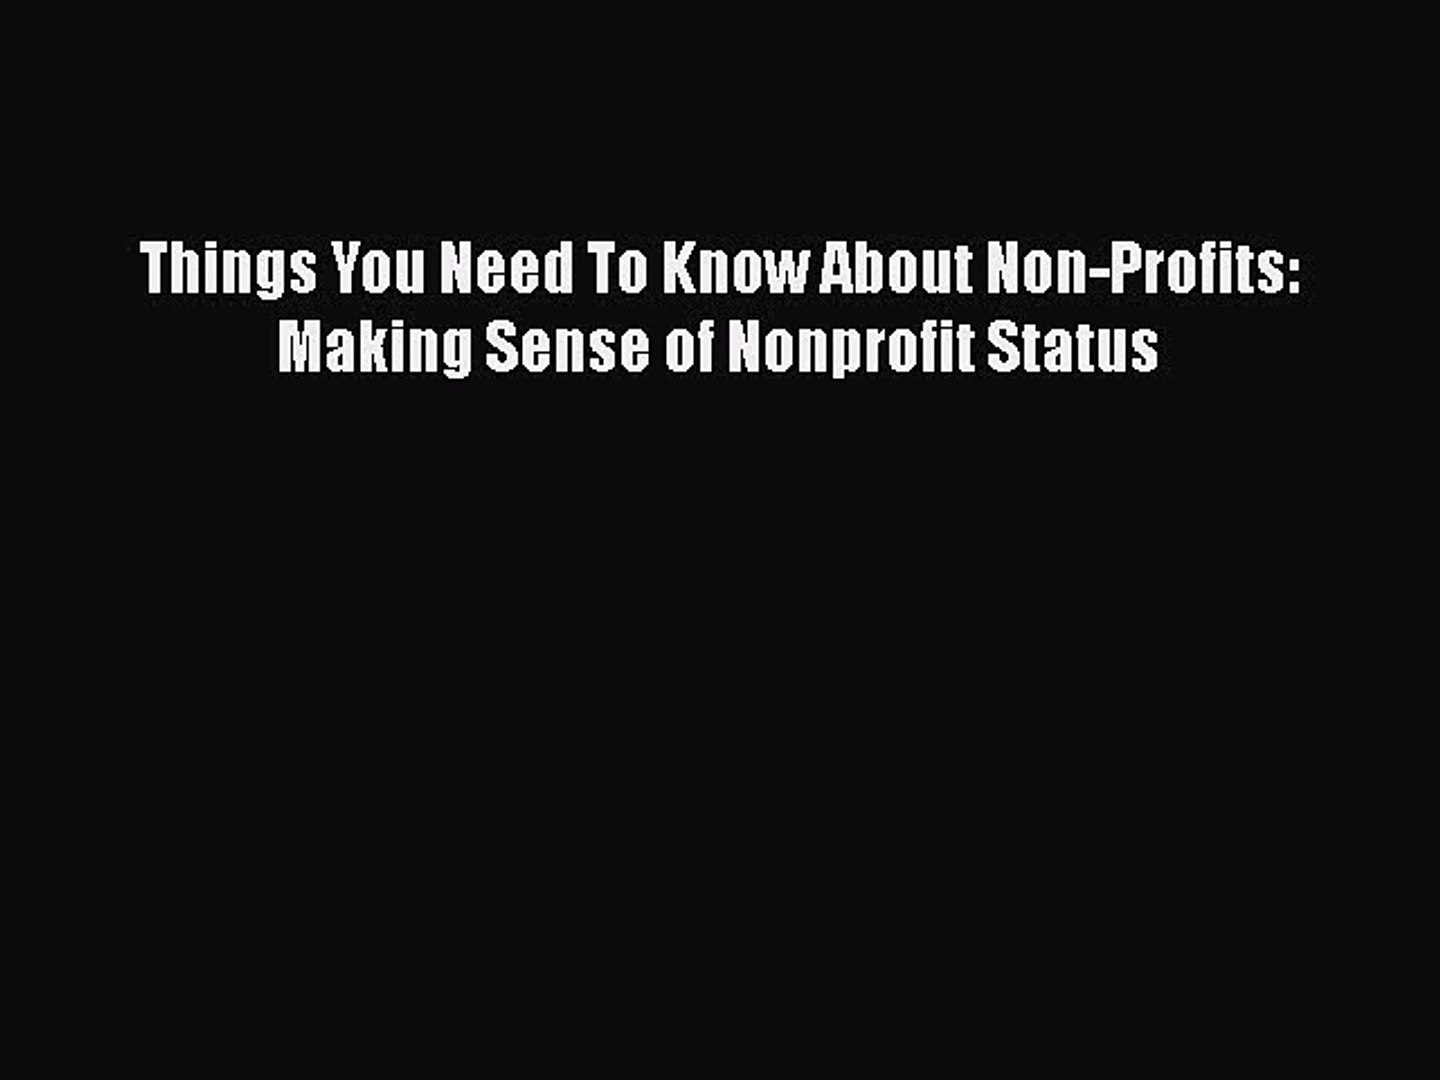 [PDF] Things You Need To Know About Non-Profits: Making Sense of Nonprofit Status [Download]